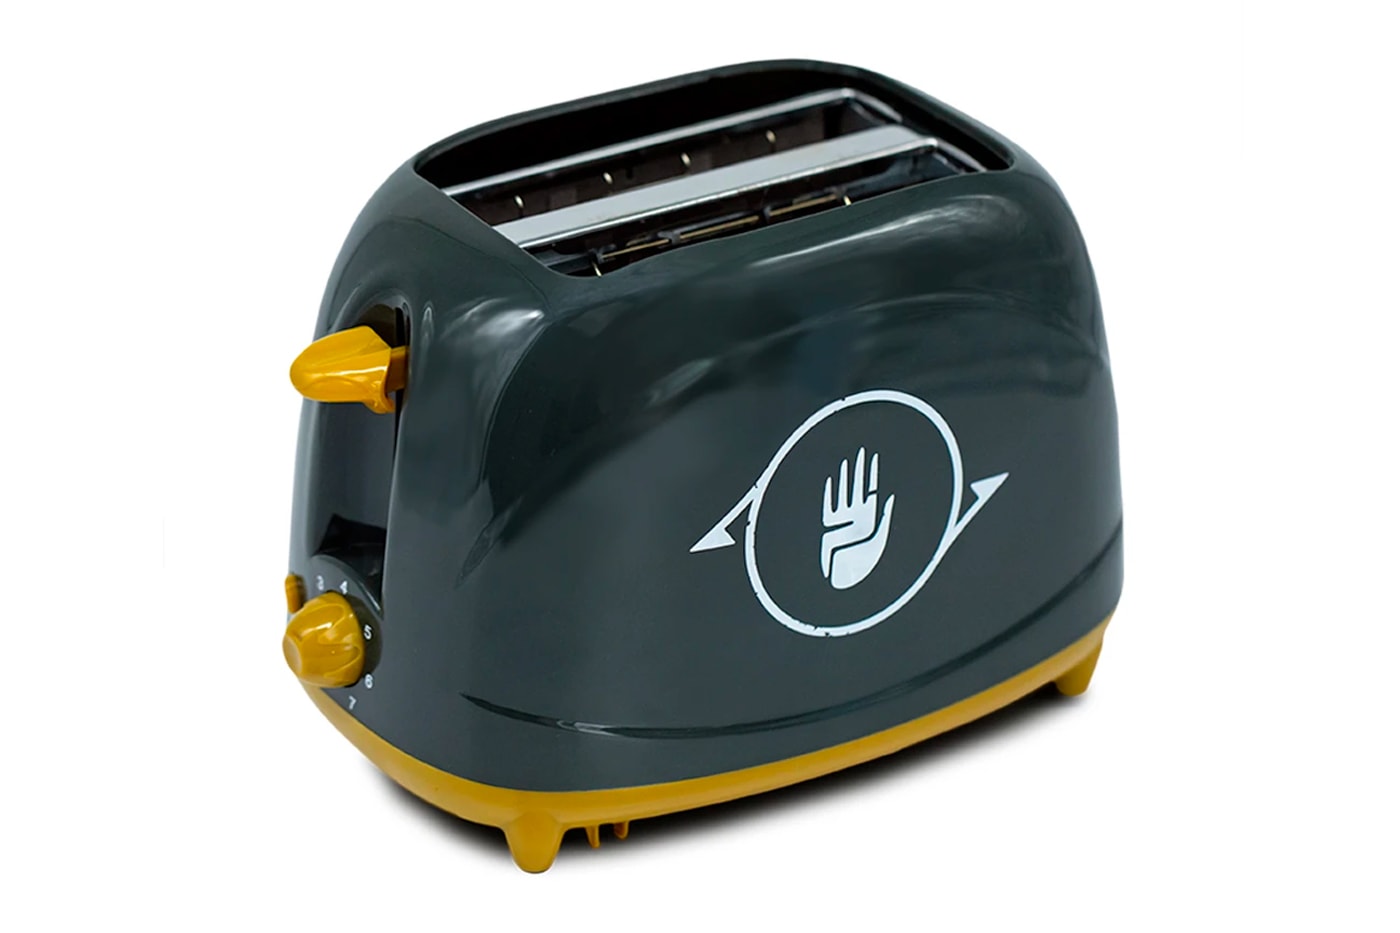 Bungie Destiny toaster St. Jude Children's Research Hospital release gaming bread 